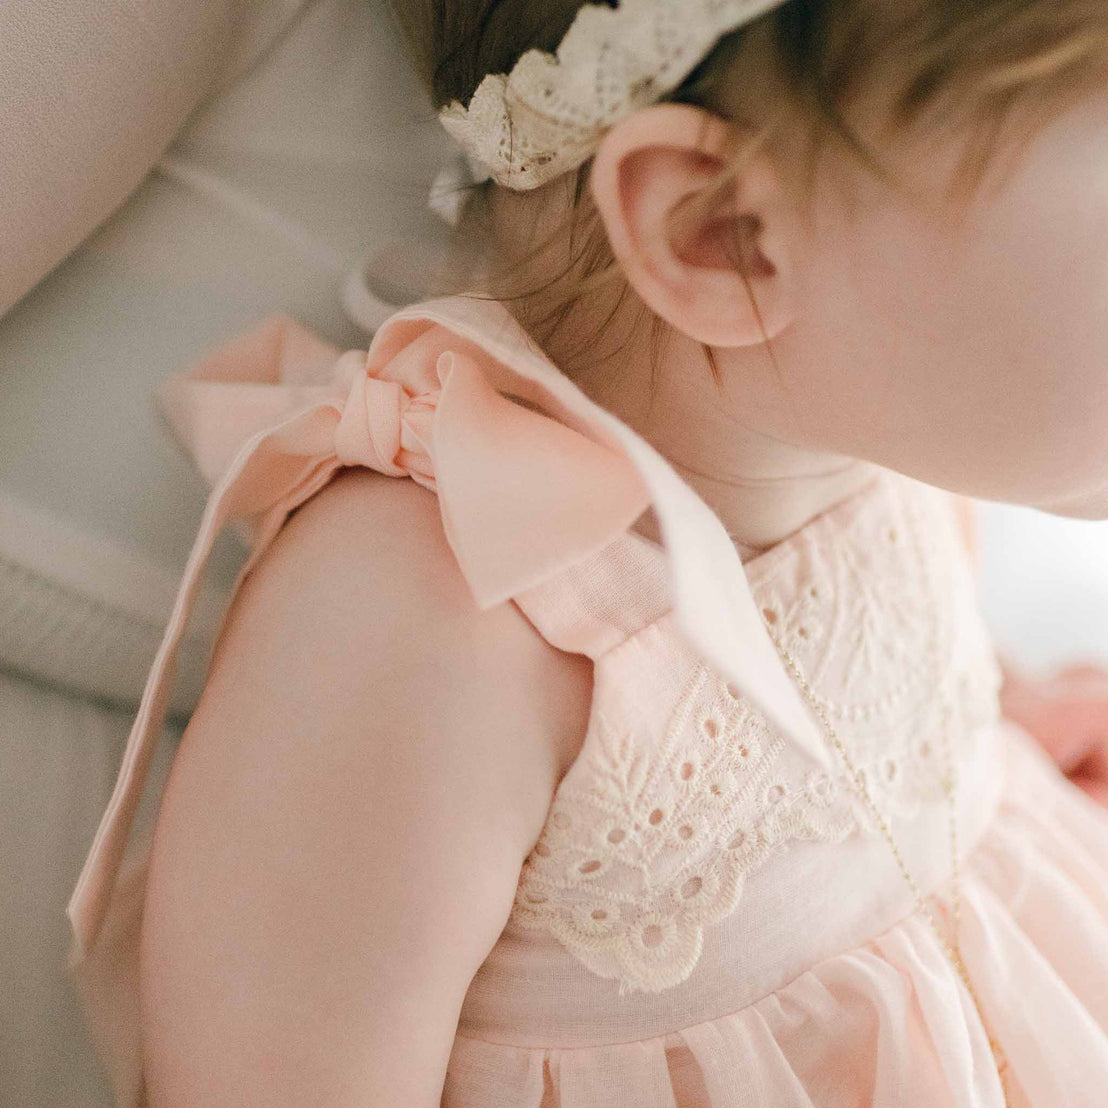 Baby wearing the pink Ingrid Romper Dress. The photo showcases the pink tie straps on her shoulders